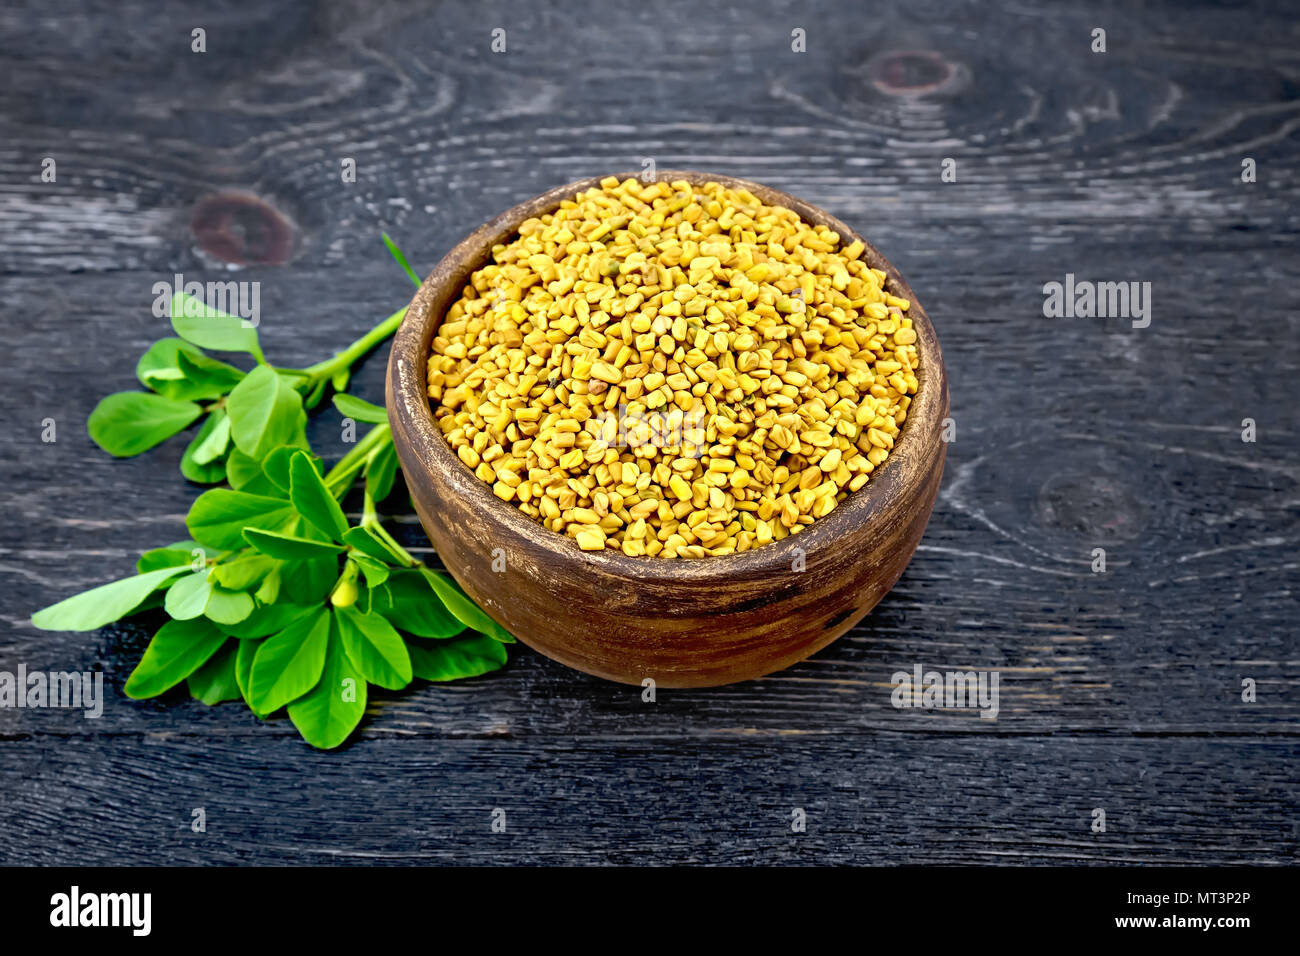 Fenugreek seeds in a clay bowl with green leaves against a black wooden board Stock Photo